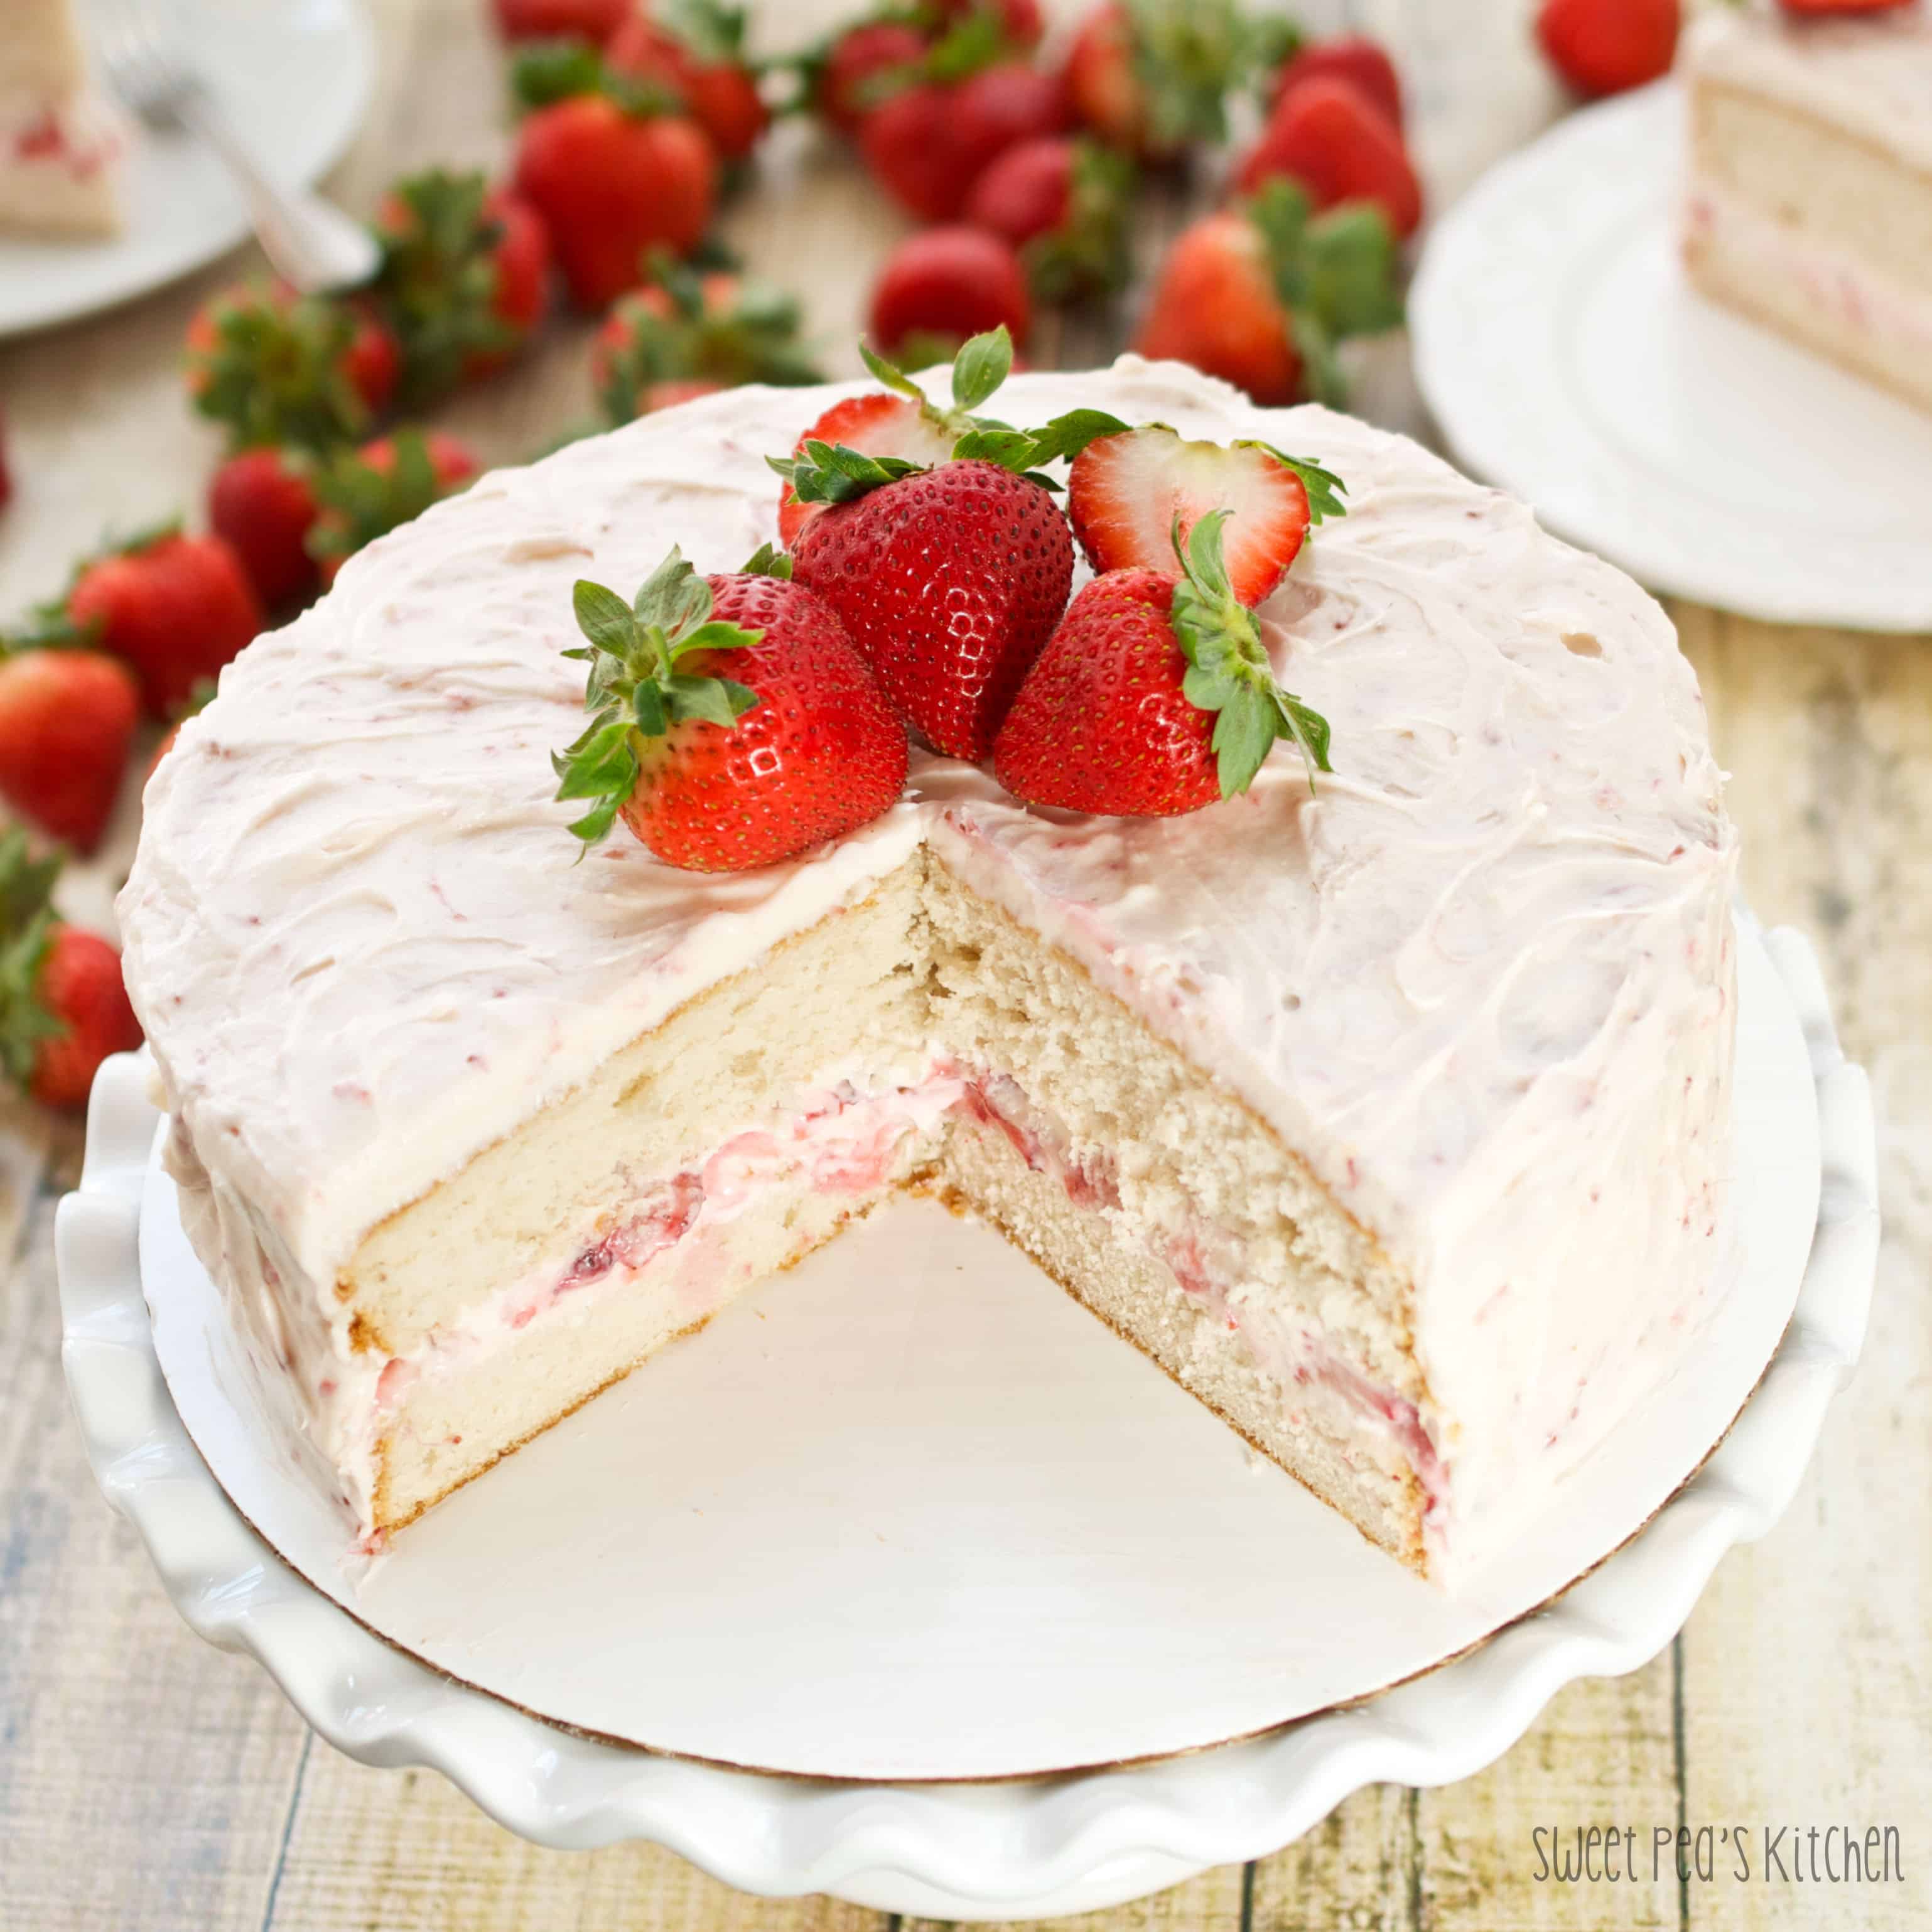 Strawberry cake on a white cake plate with a slice missing